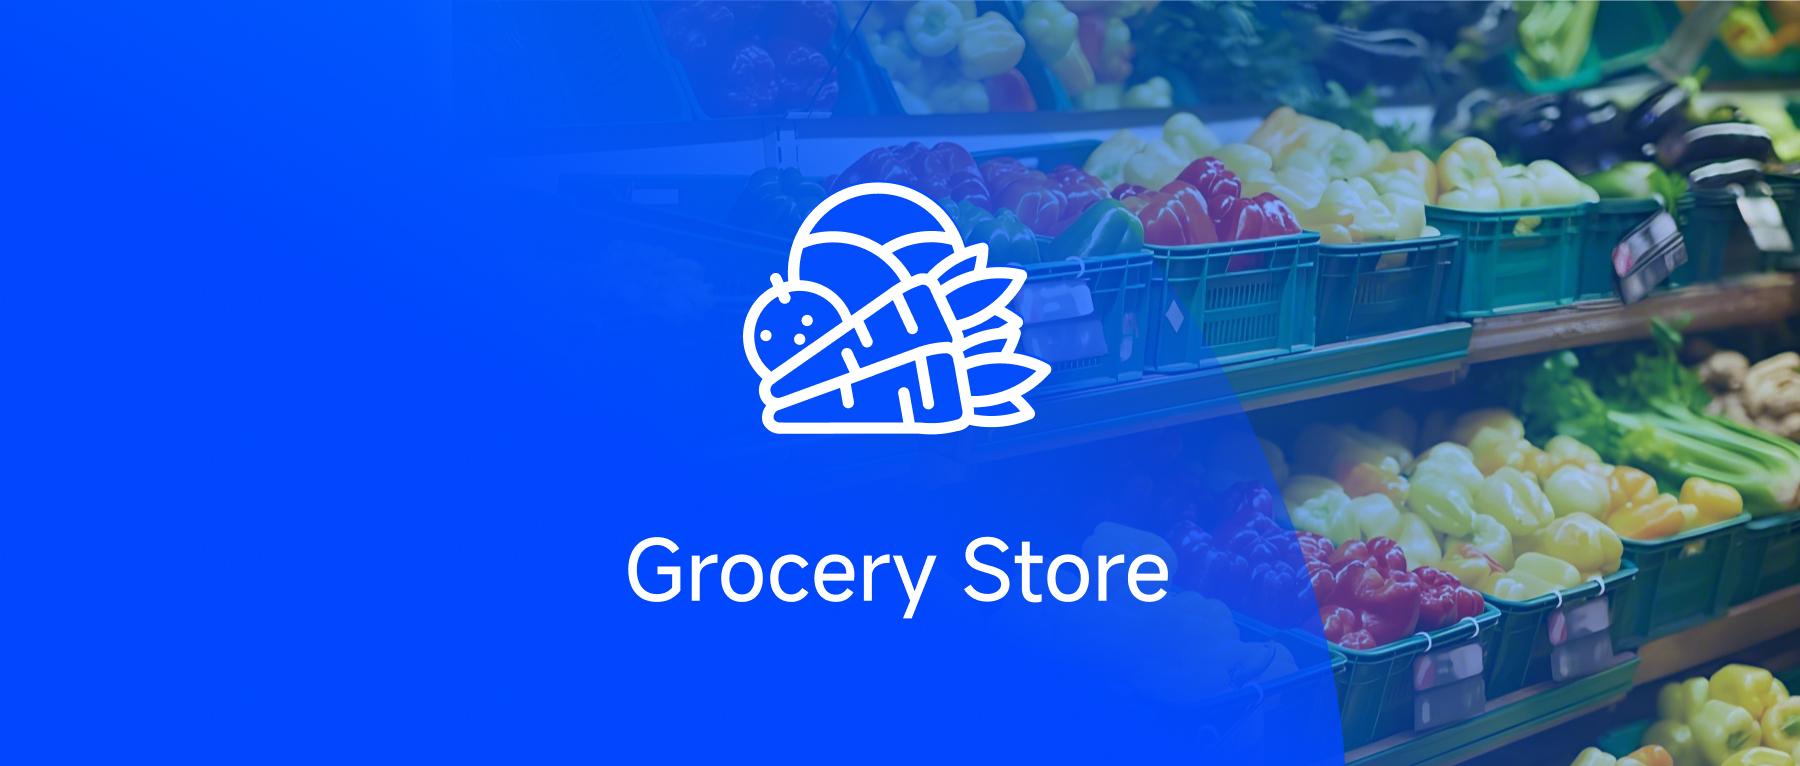 Cross-cluster replication for read-write separation: story of a grocery store brand